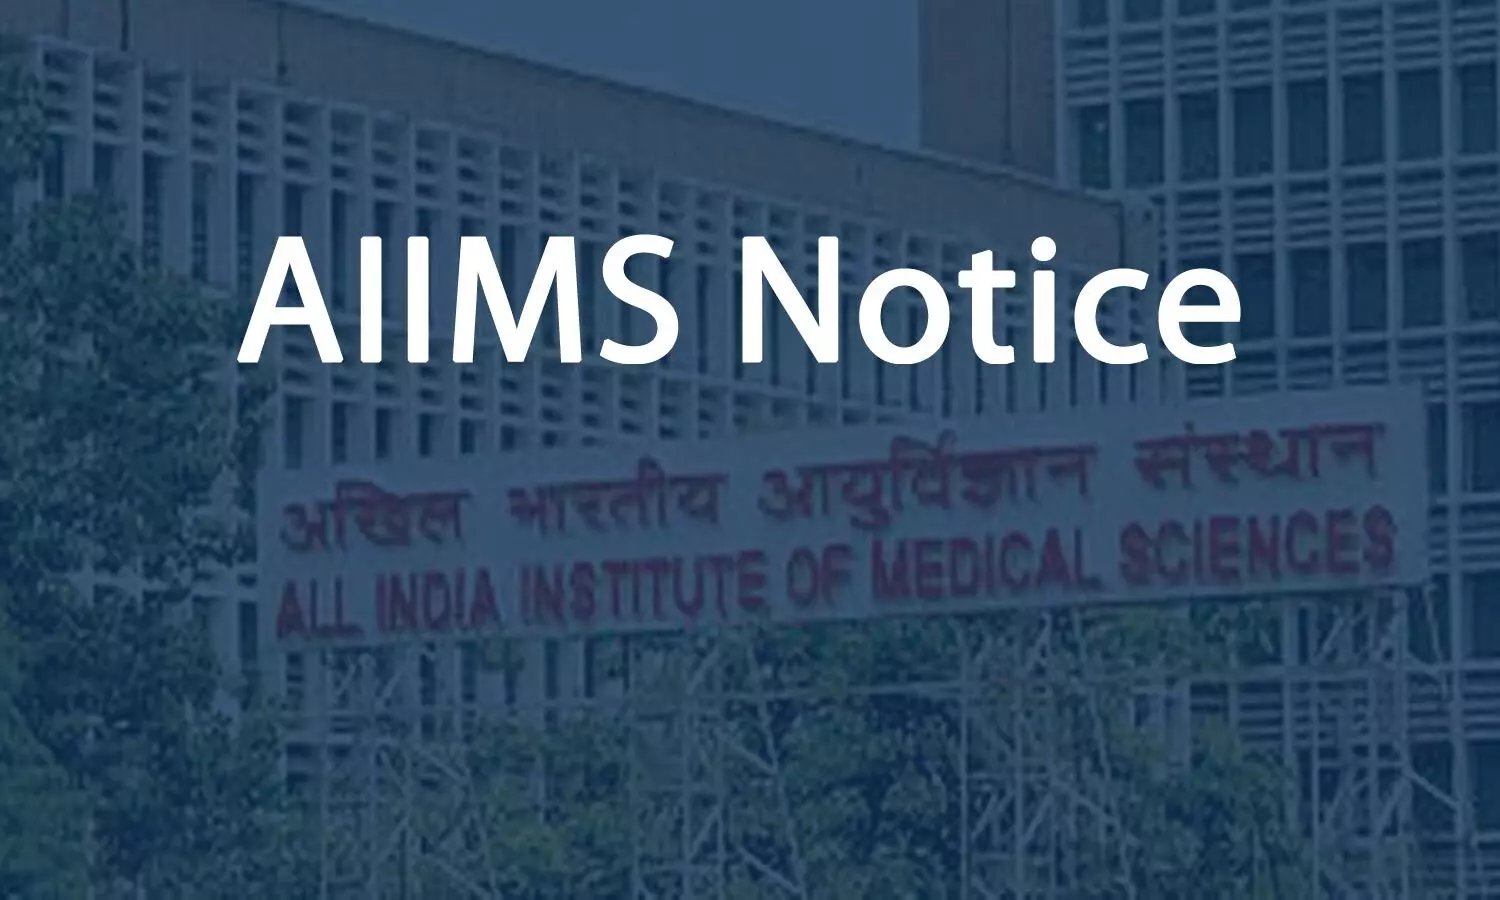 DM Infectious Diseases Professional Exam: AIIMS publishes result of 1 candidate